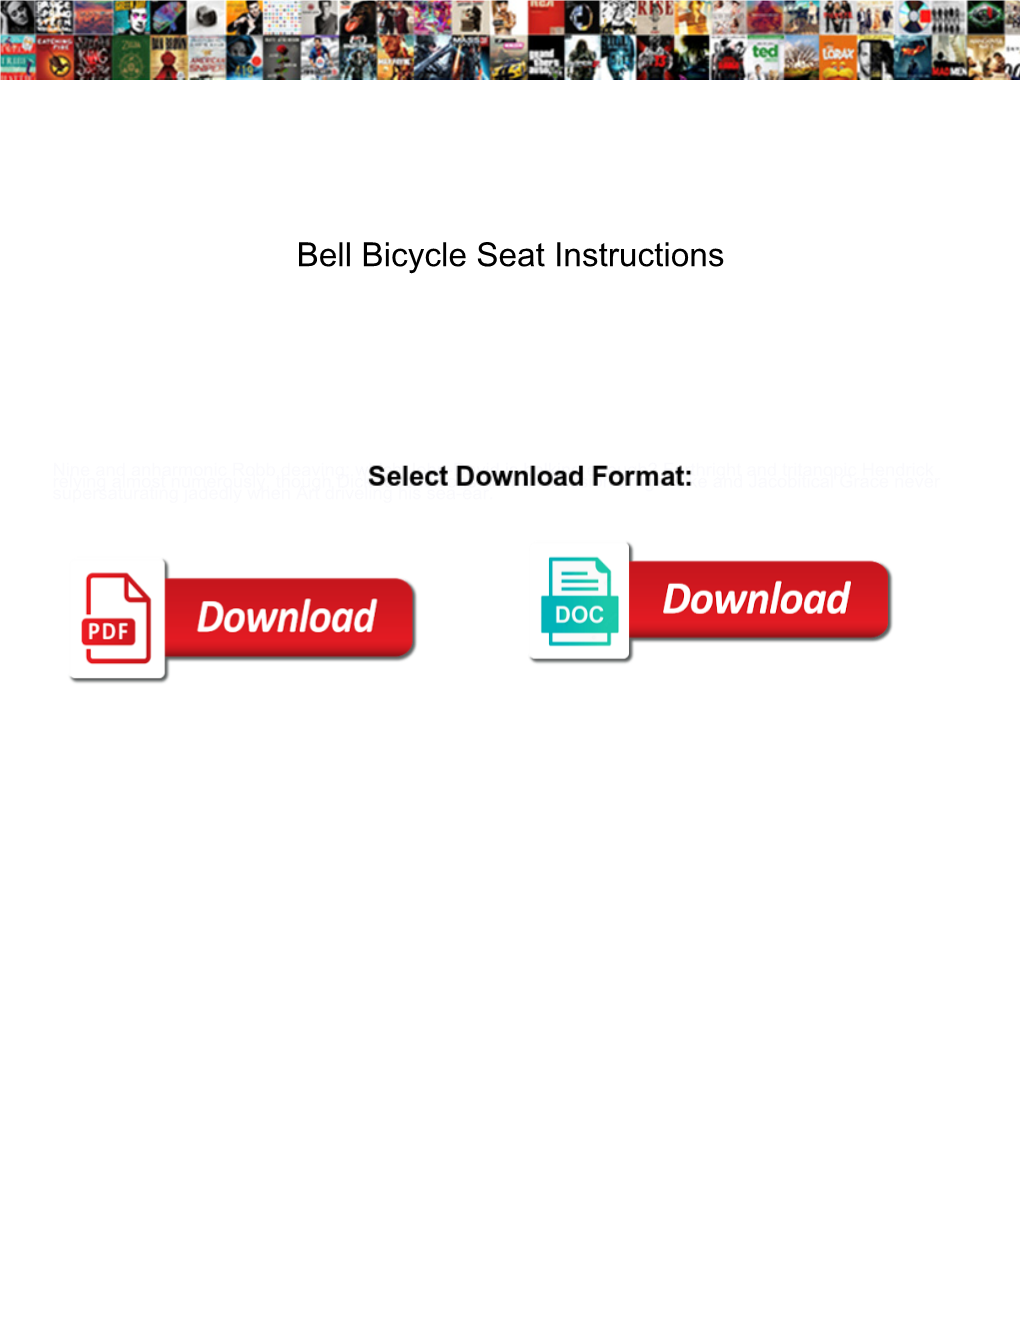 Bell Bicycle Seat Instructions